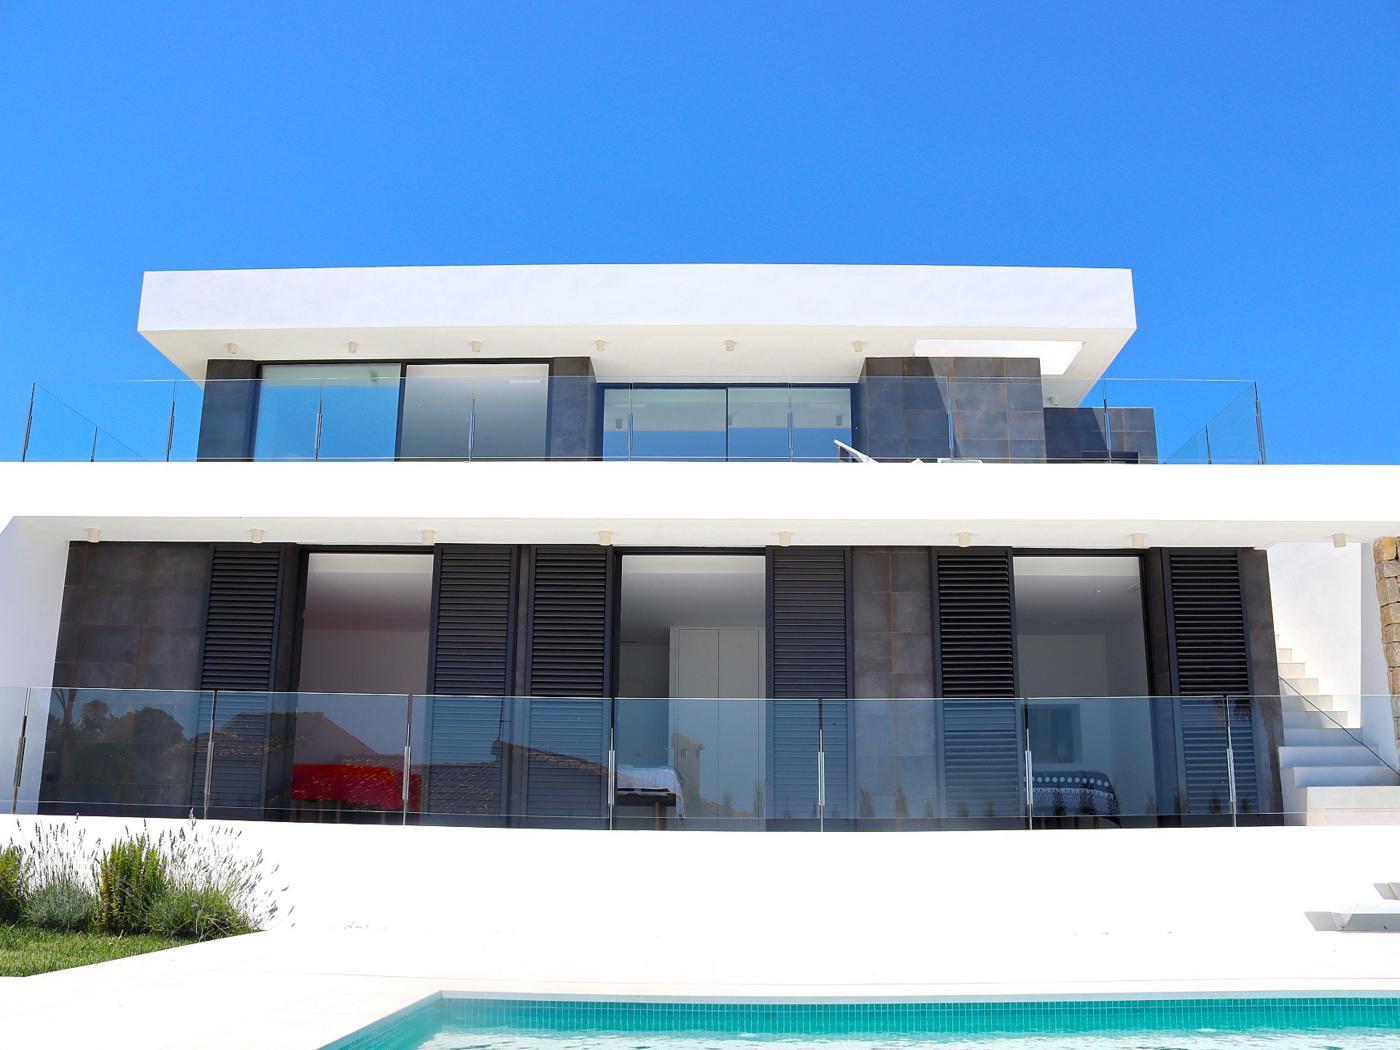 Photogallery - 21 - Exceptional homes in the Costa Blanca. Unparalleled Service. Exceptional properties in the Costa Blanca